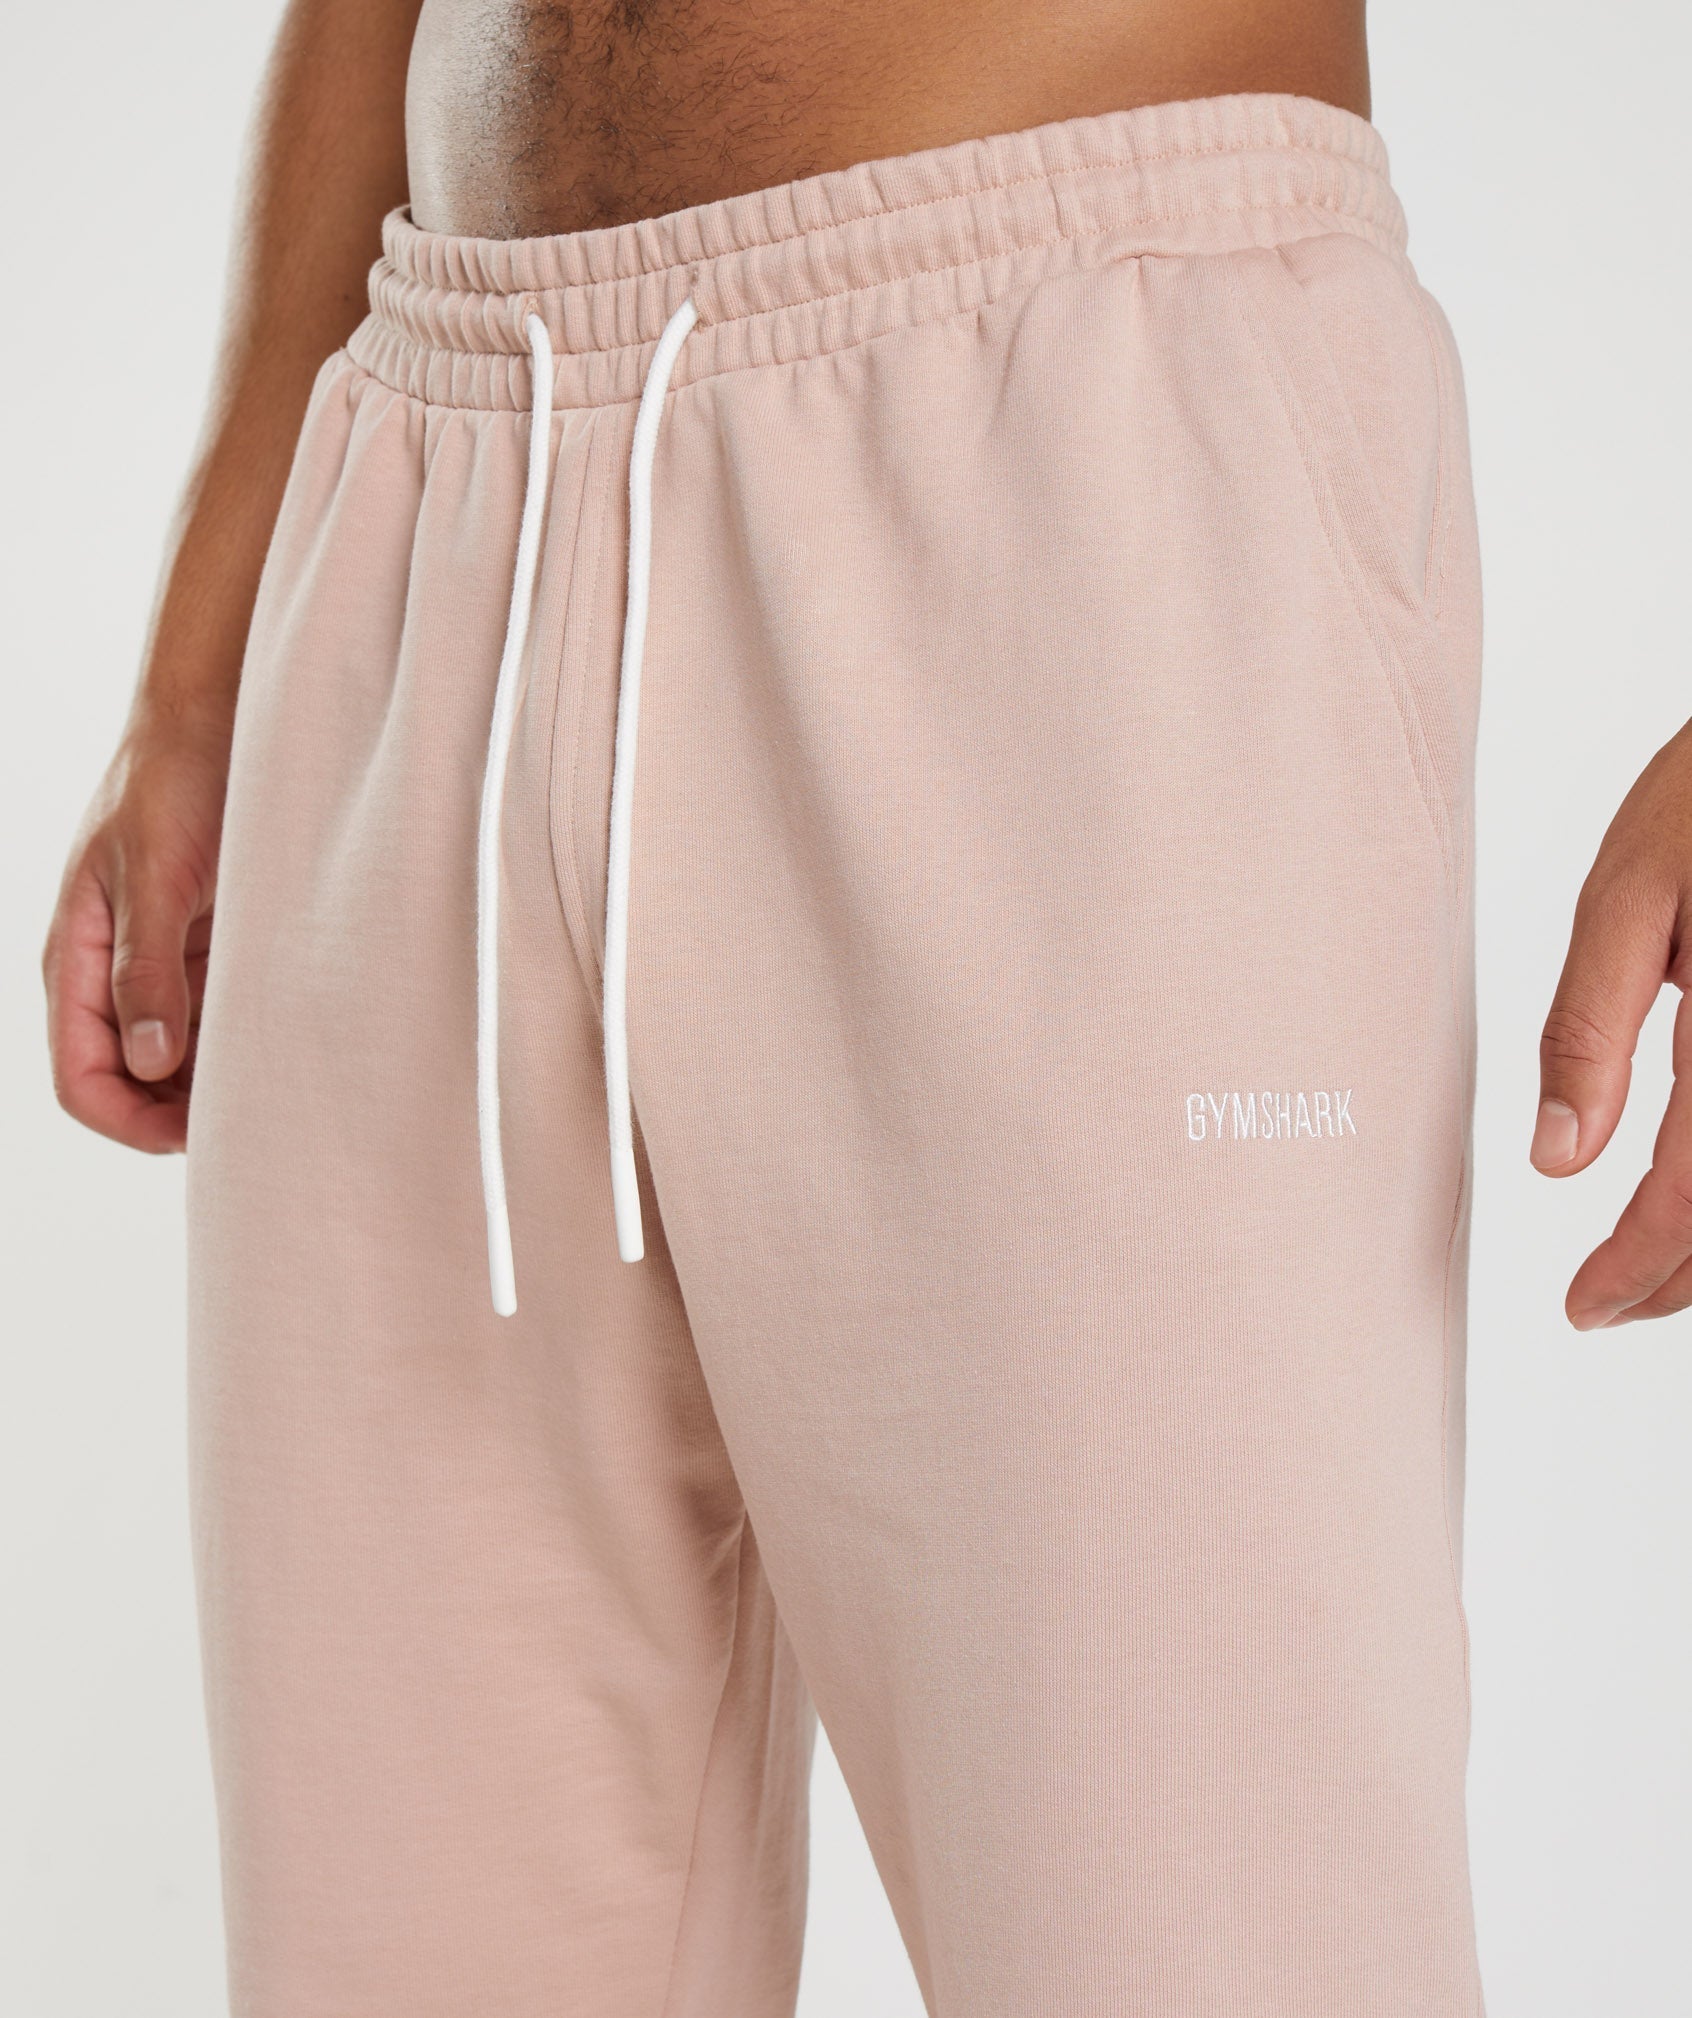 Rest Day Sweats Joggers in Dusty Taupe